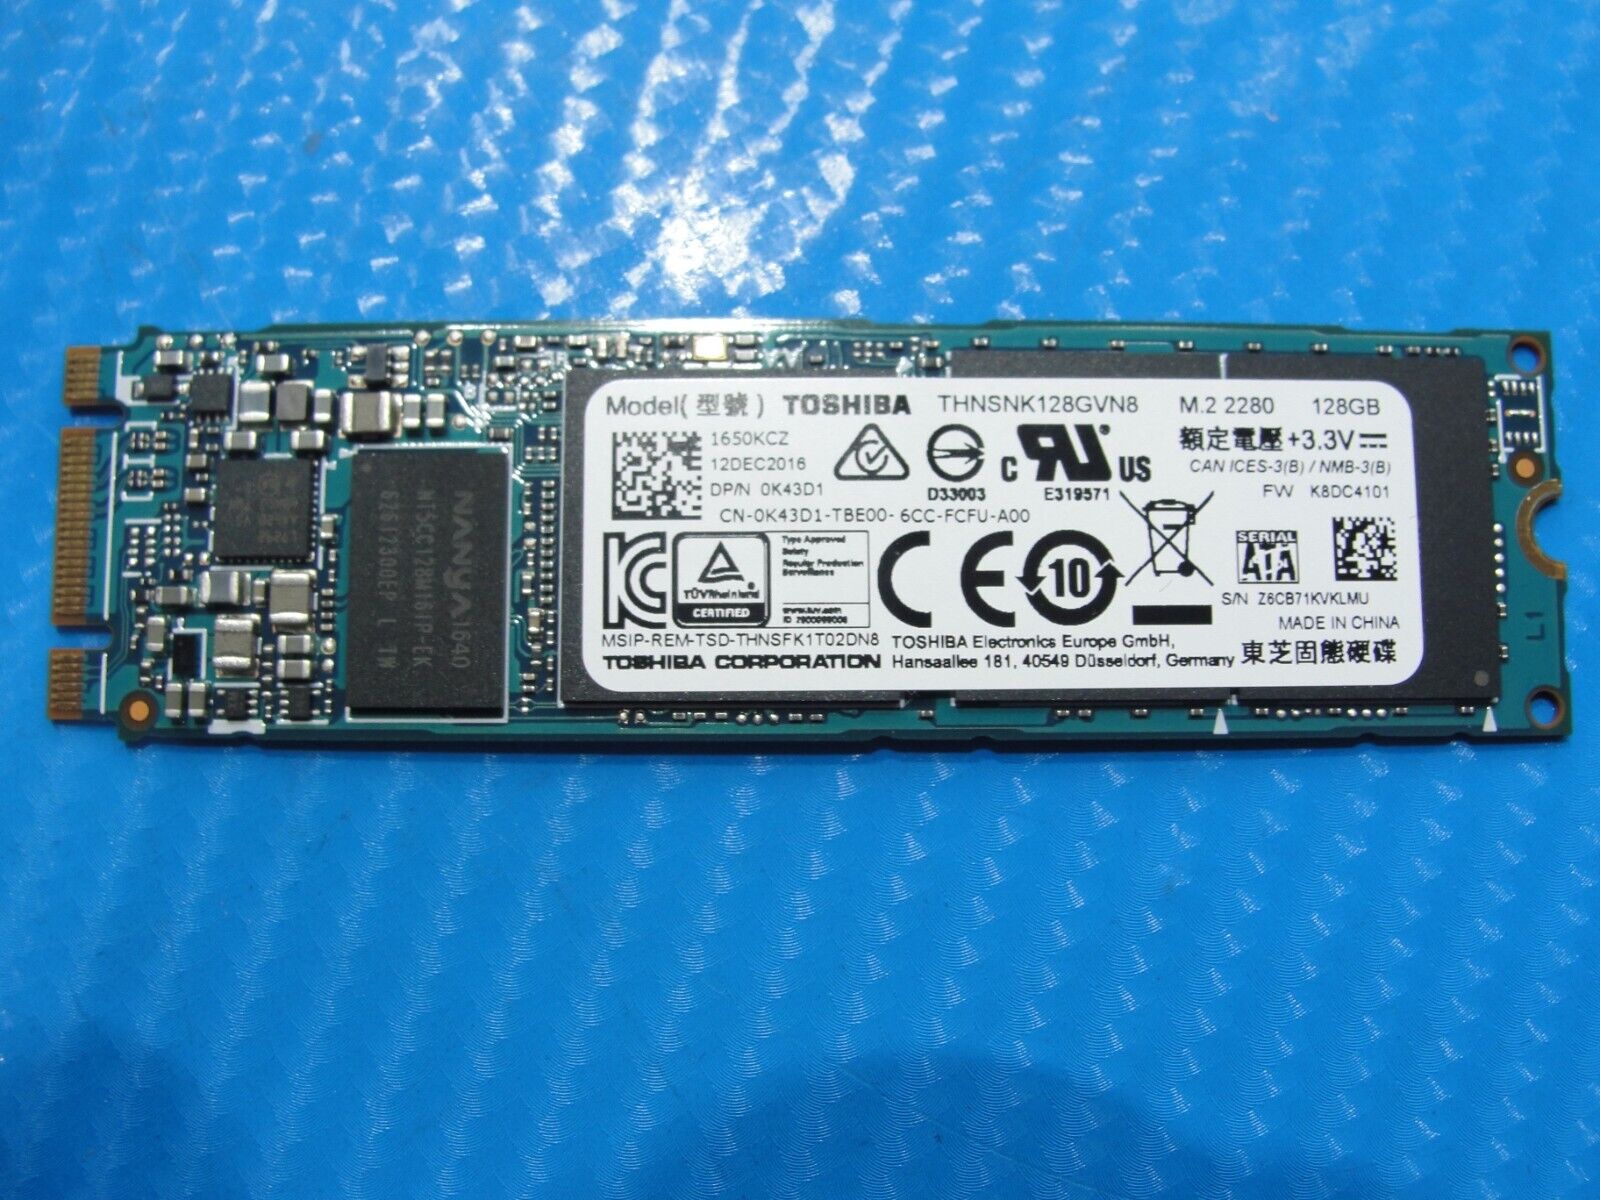 Dell 7480 Toshiba 128Gb Sata M.2 SSD Solid State Drive THNSNK128GVN8 K43D1